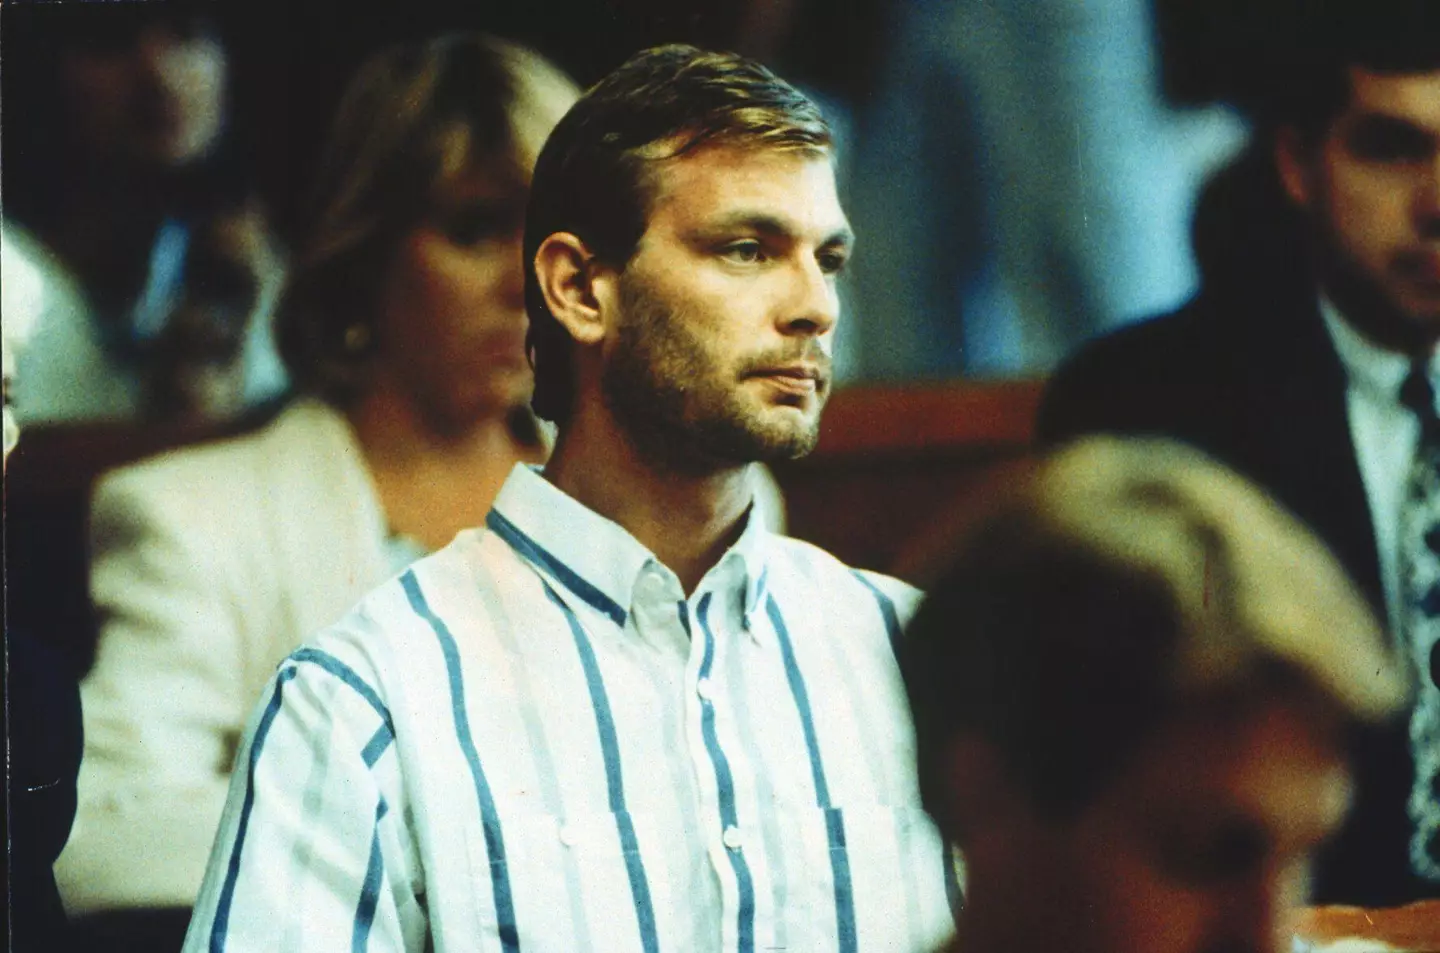 Dahmer was responsible for more than a dozen deaths.